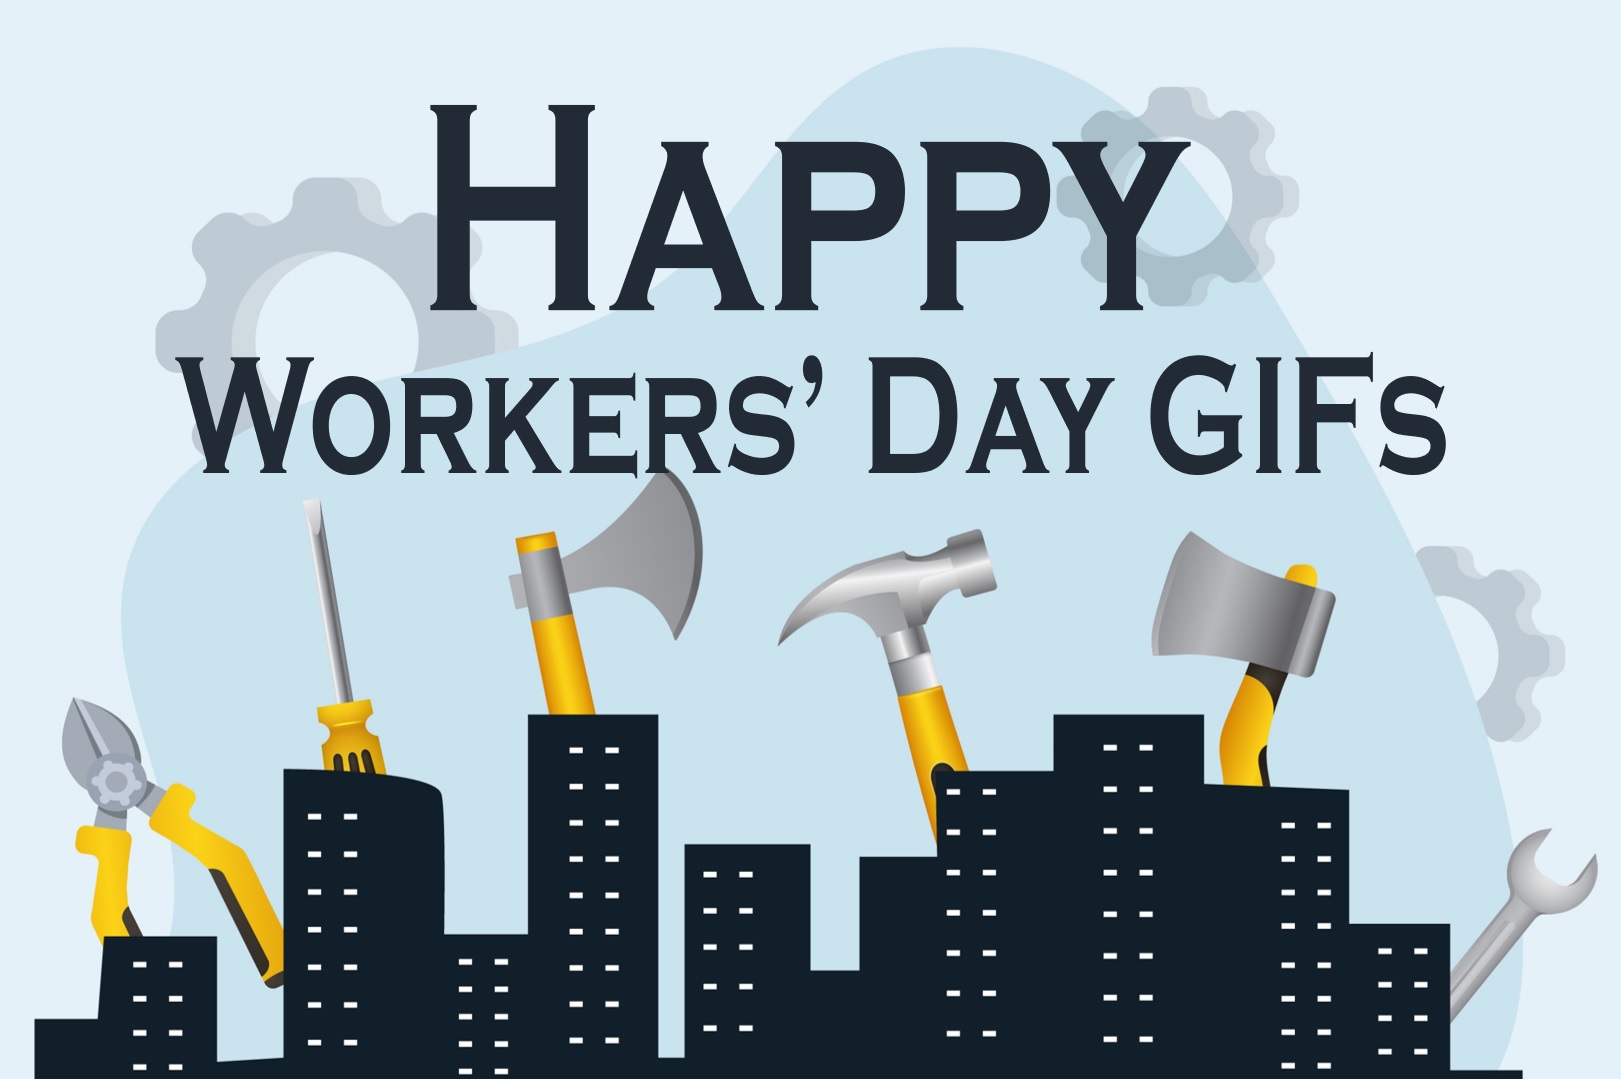 Happy Workers' Day GIFs